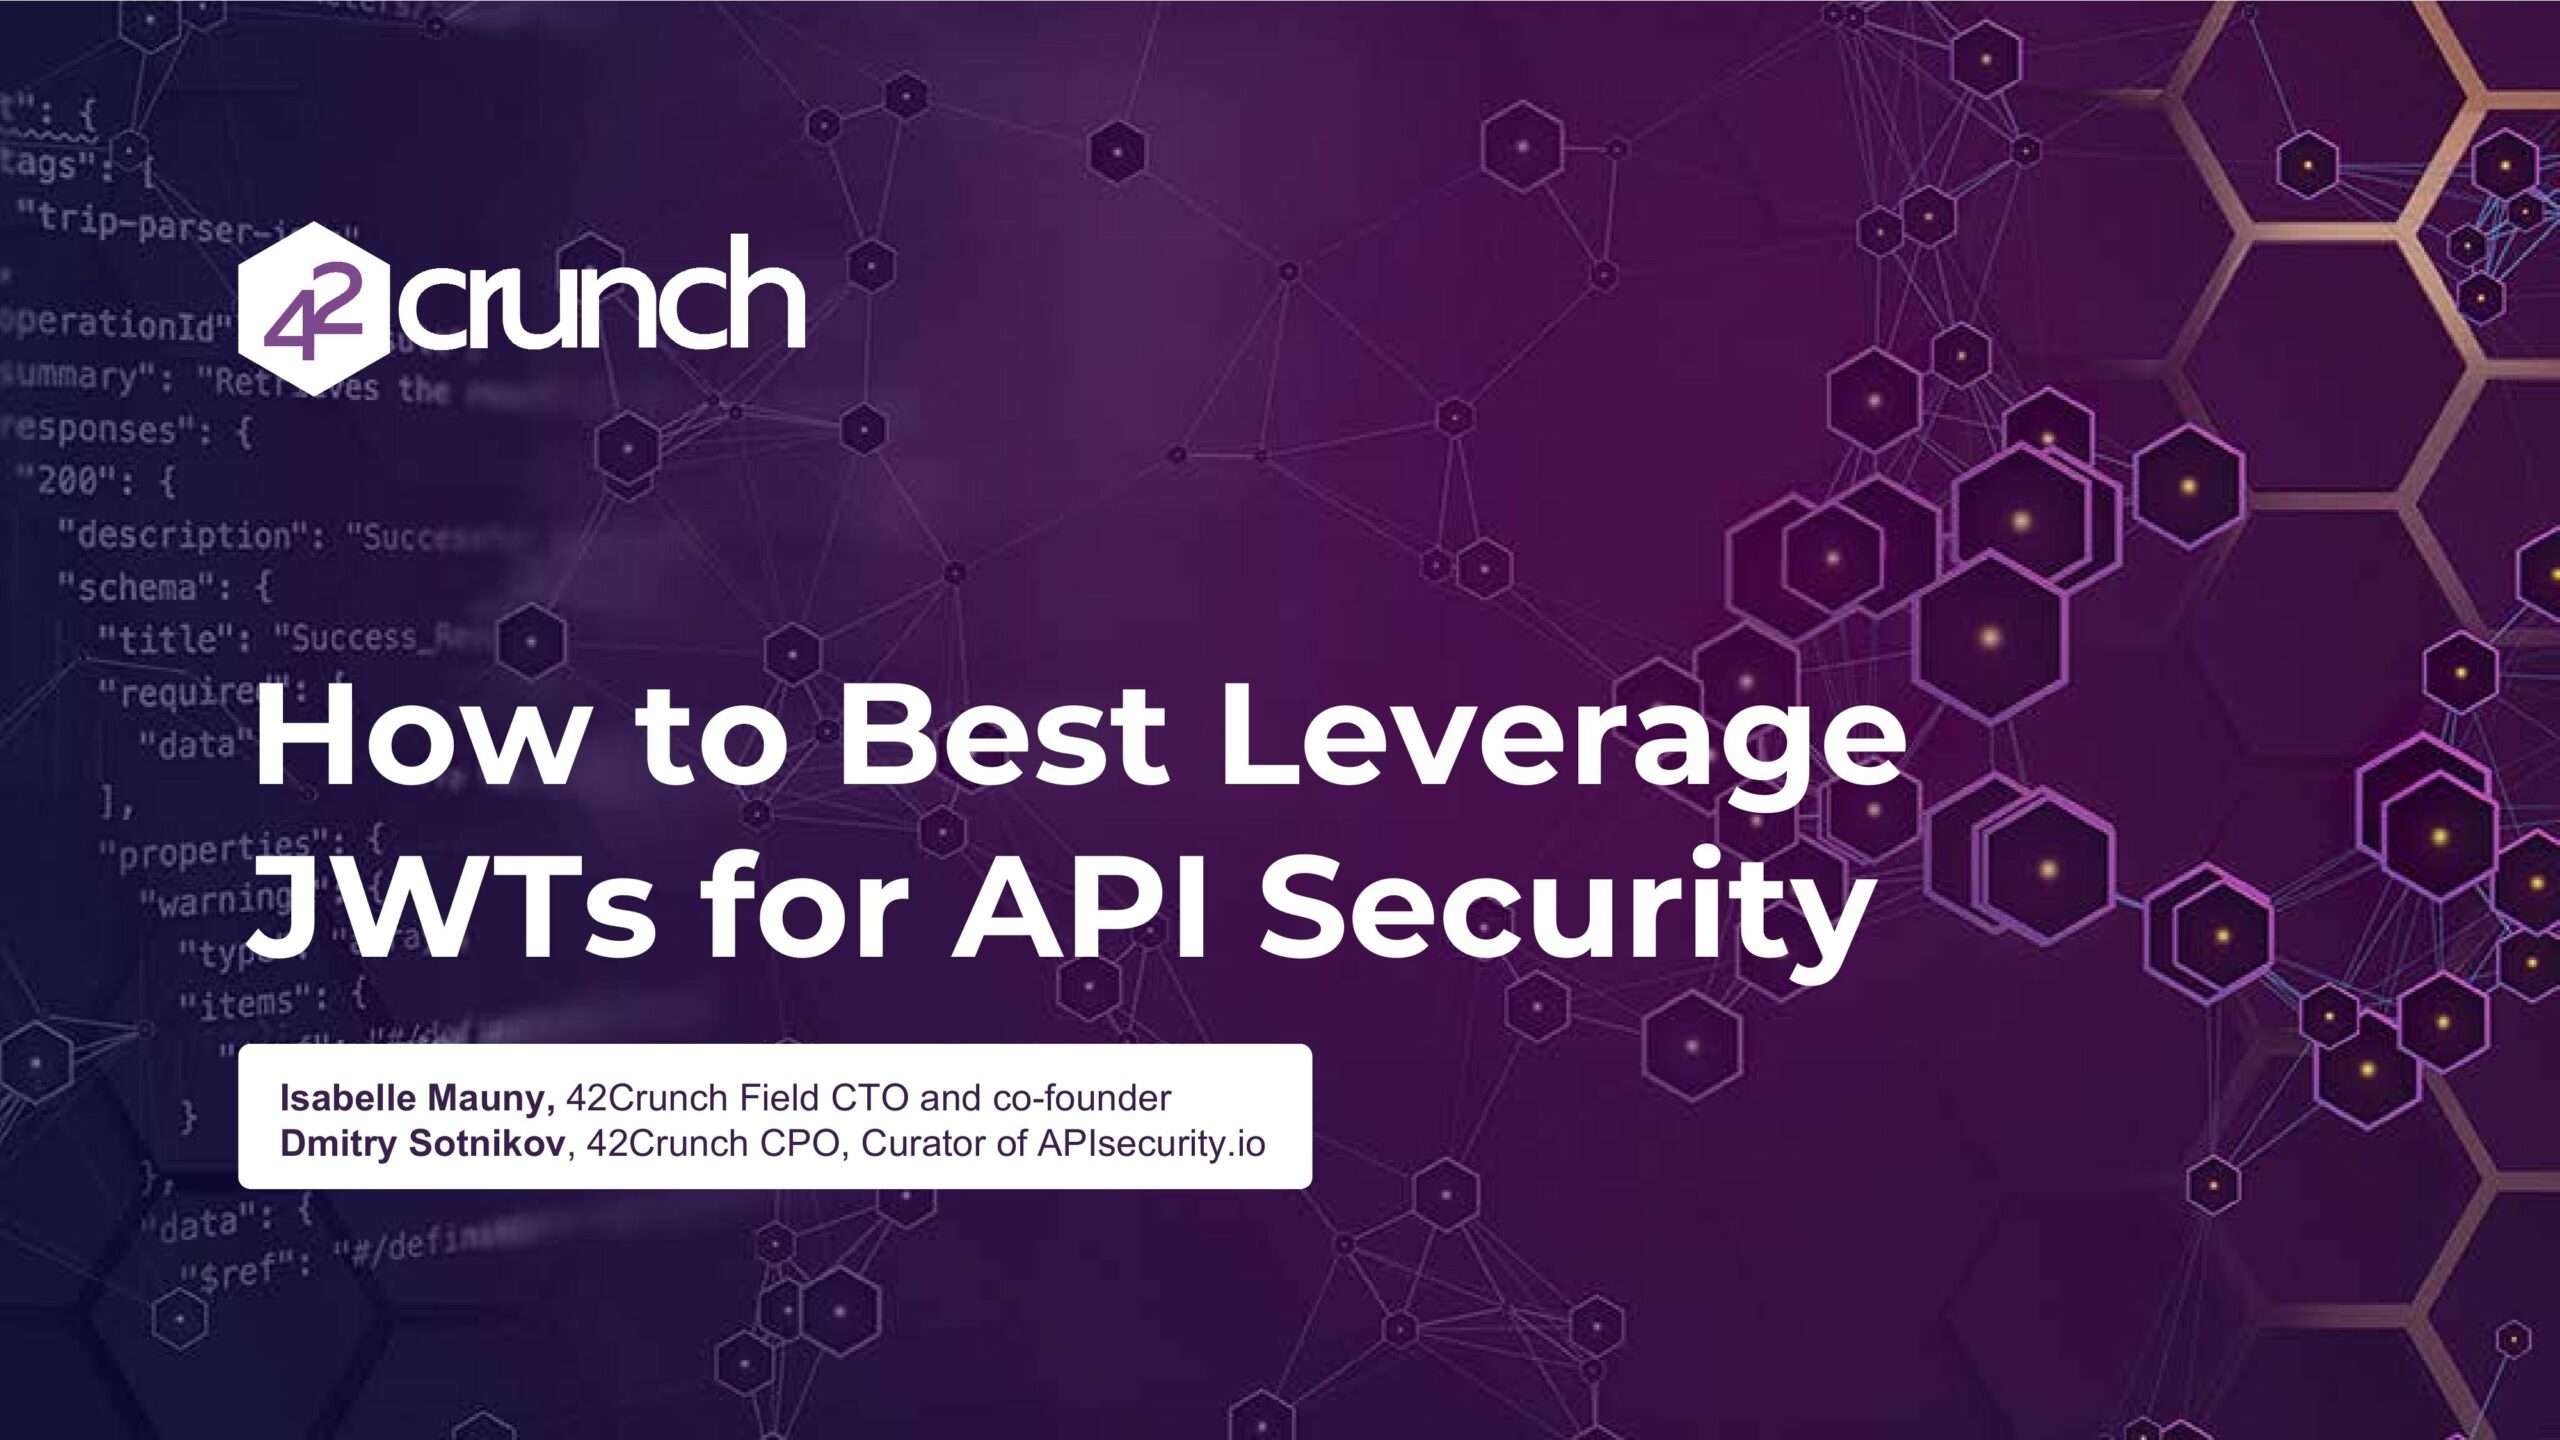 webinar-how-to-best-leverage-jwt-for-api-security0001-00